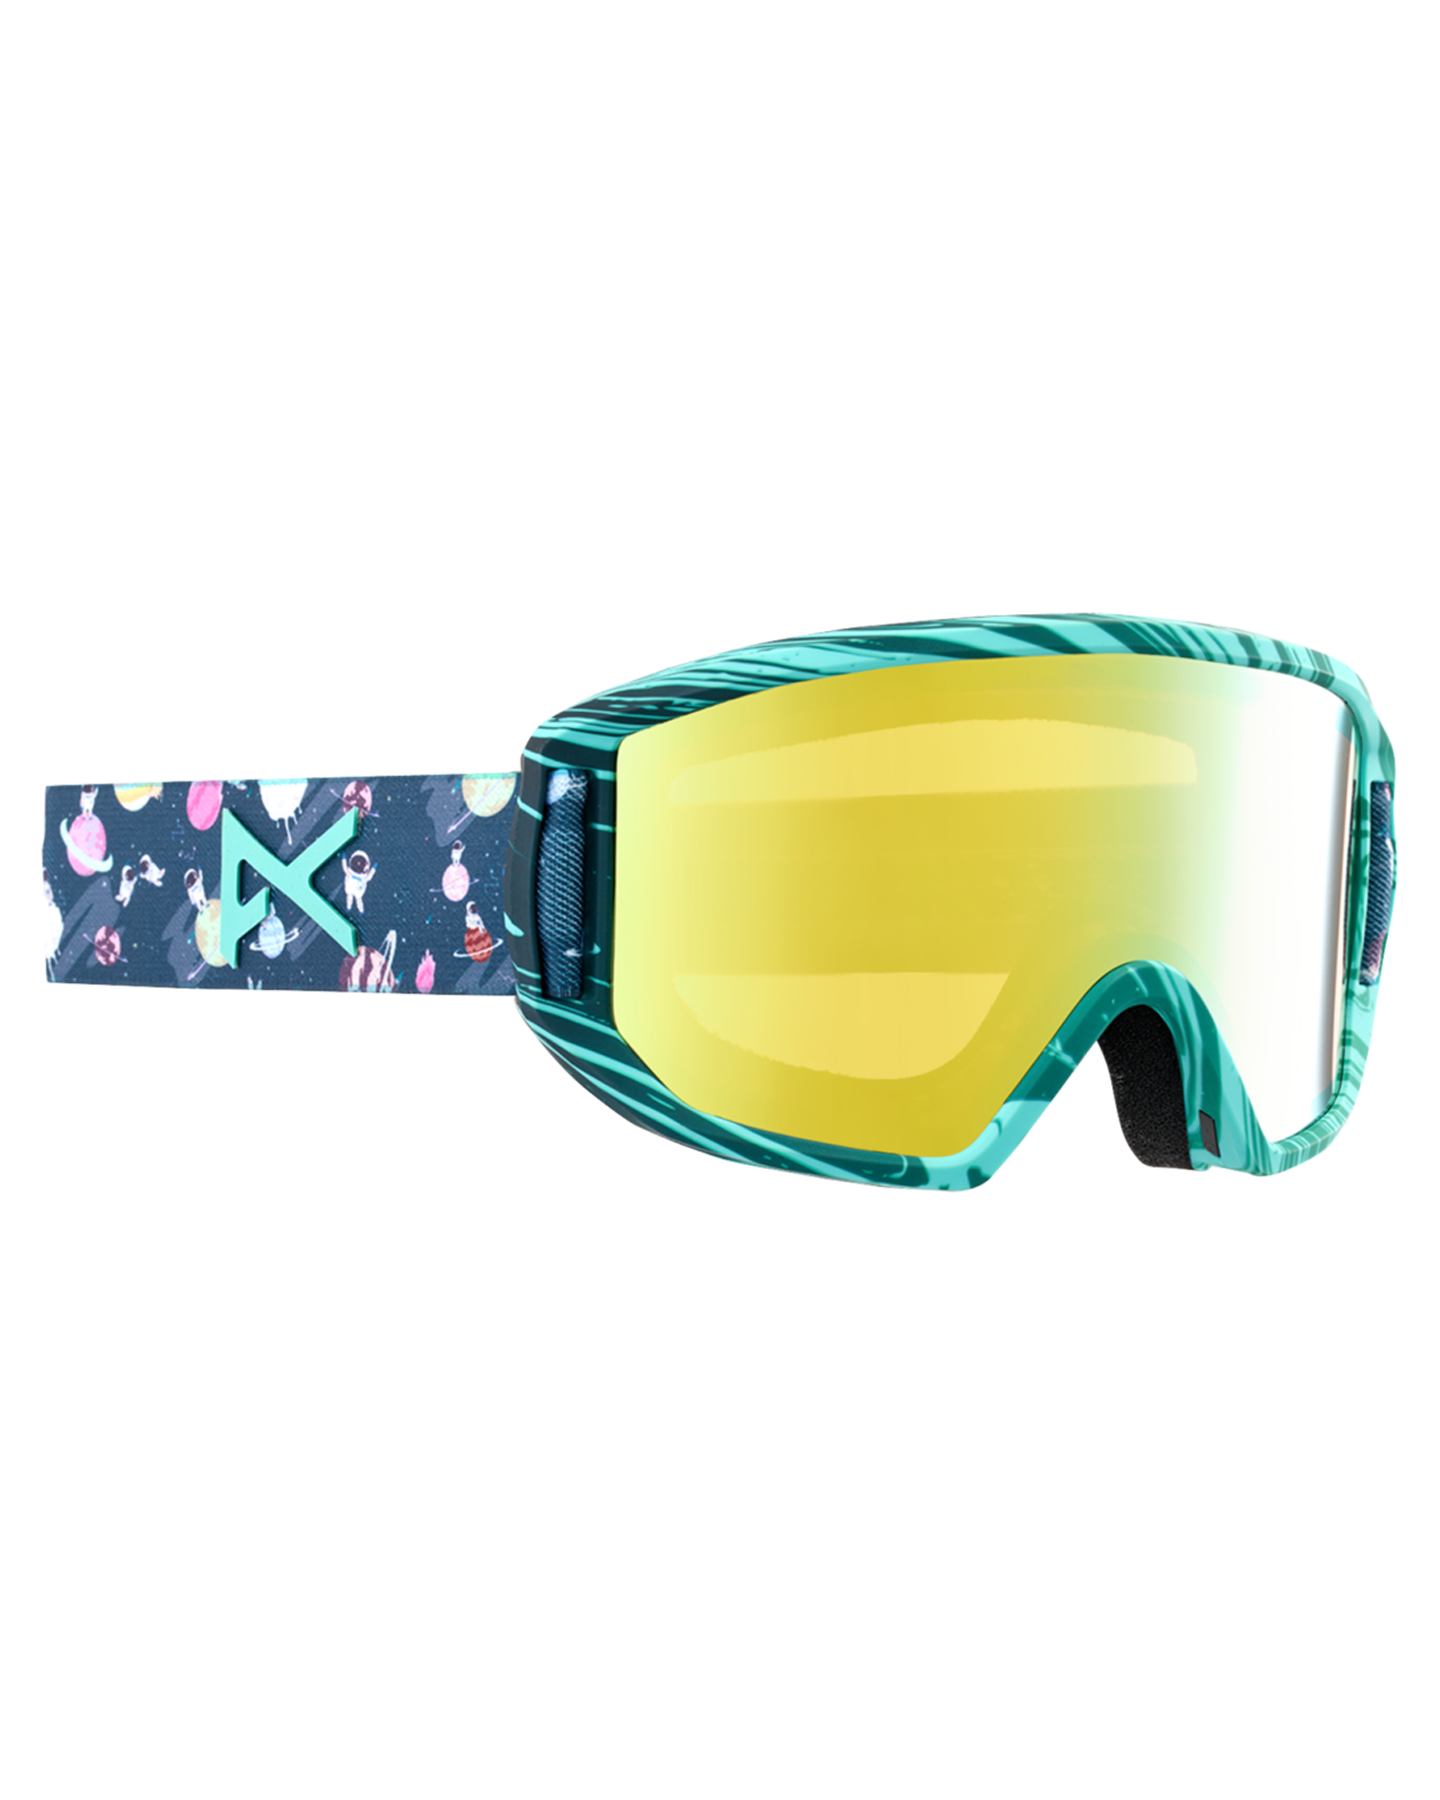 Anon Relapse Jr. Snow Goggles + MFI - Space / Gold Amber Kids' Snow Goggles - SnowSkiersWarehouse